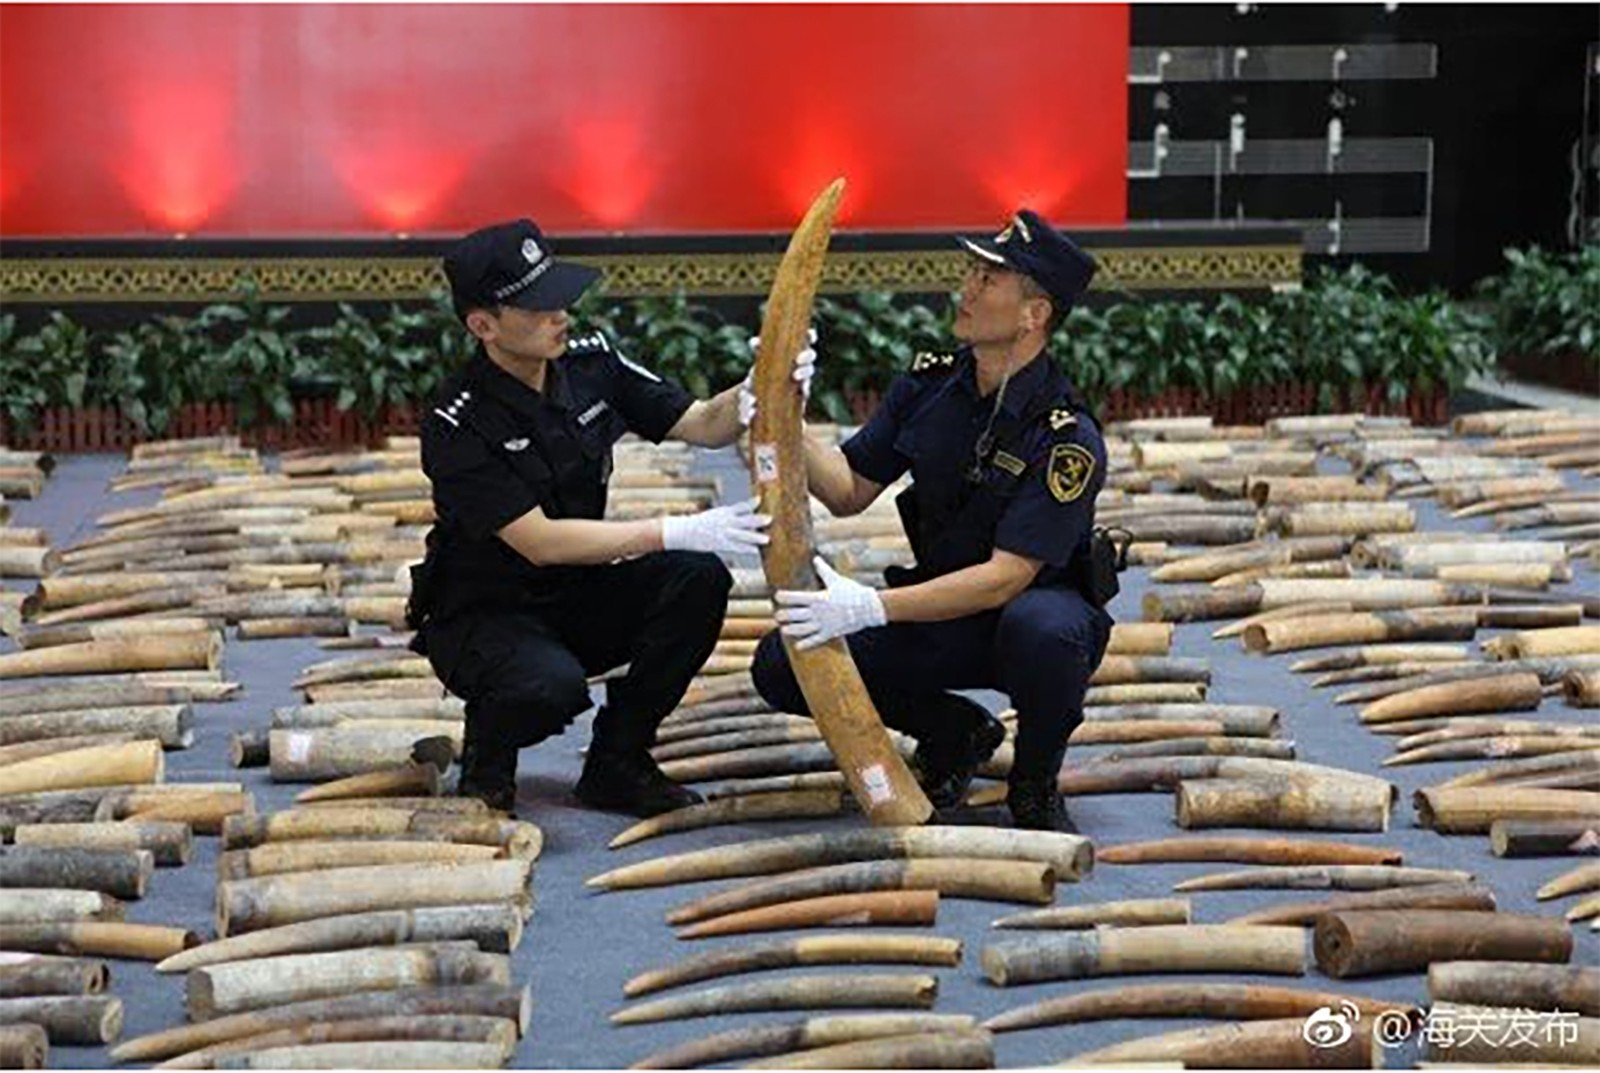 The haul of 2,748 elephant tusks was the biggest seizure of ivory handled by Chinese customs in recent years. Photo: Sina